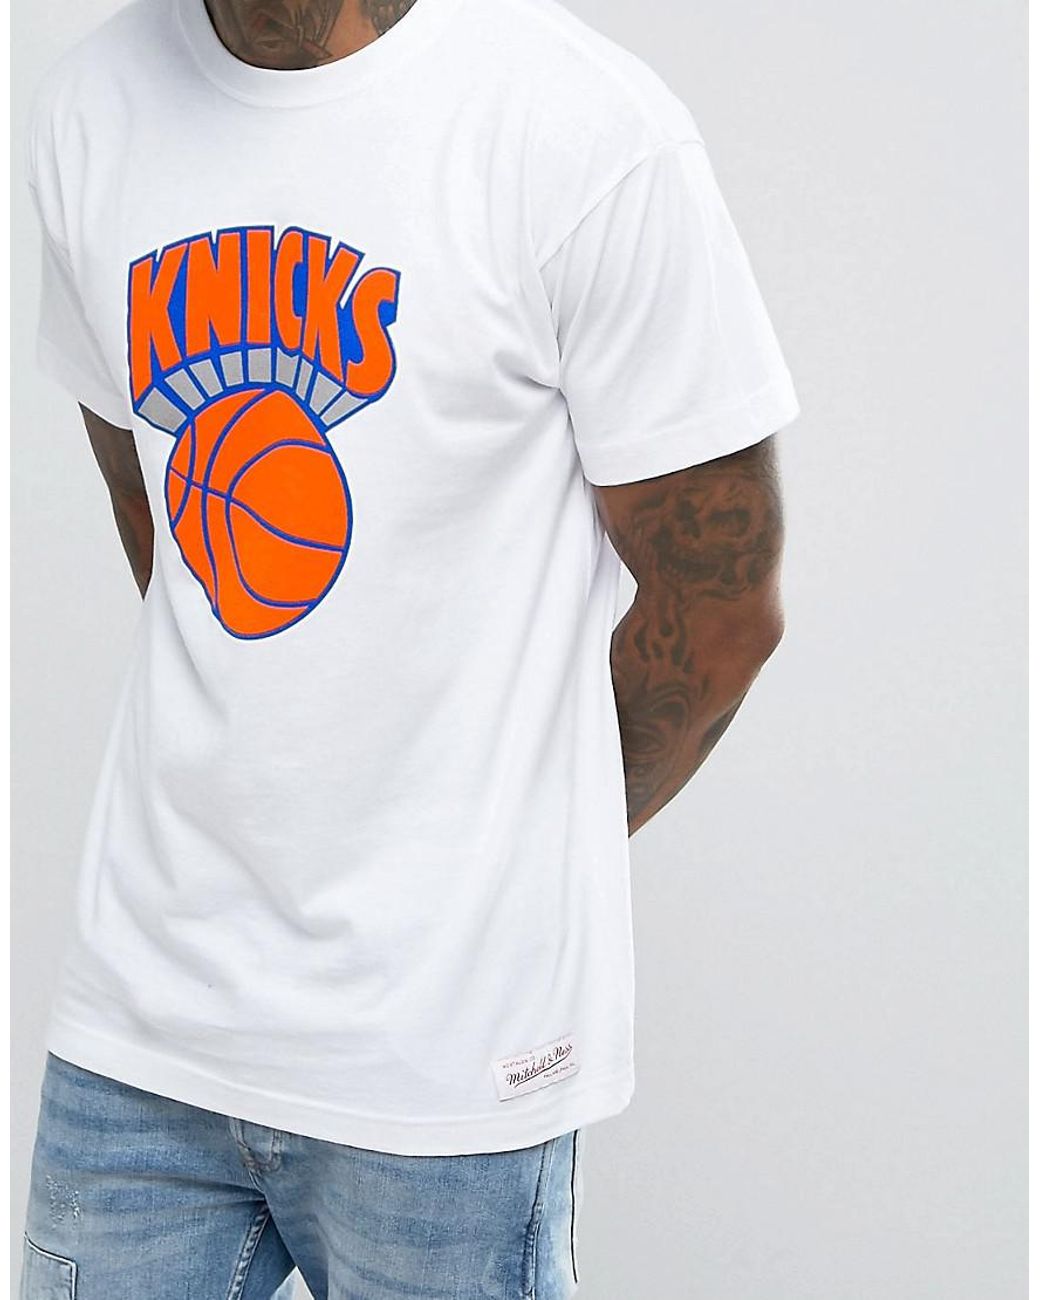 Msg Knicks Merch - Mitchell And Ness Knicks Doodle T-Shirt Unisex White